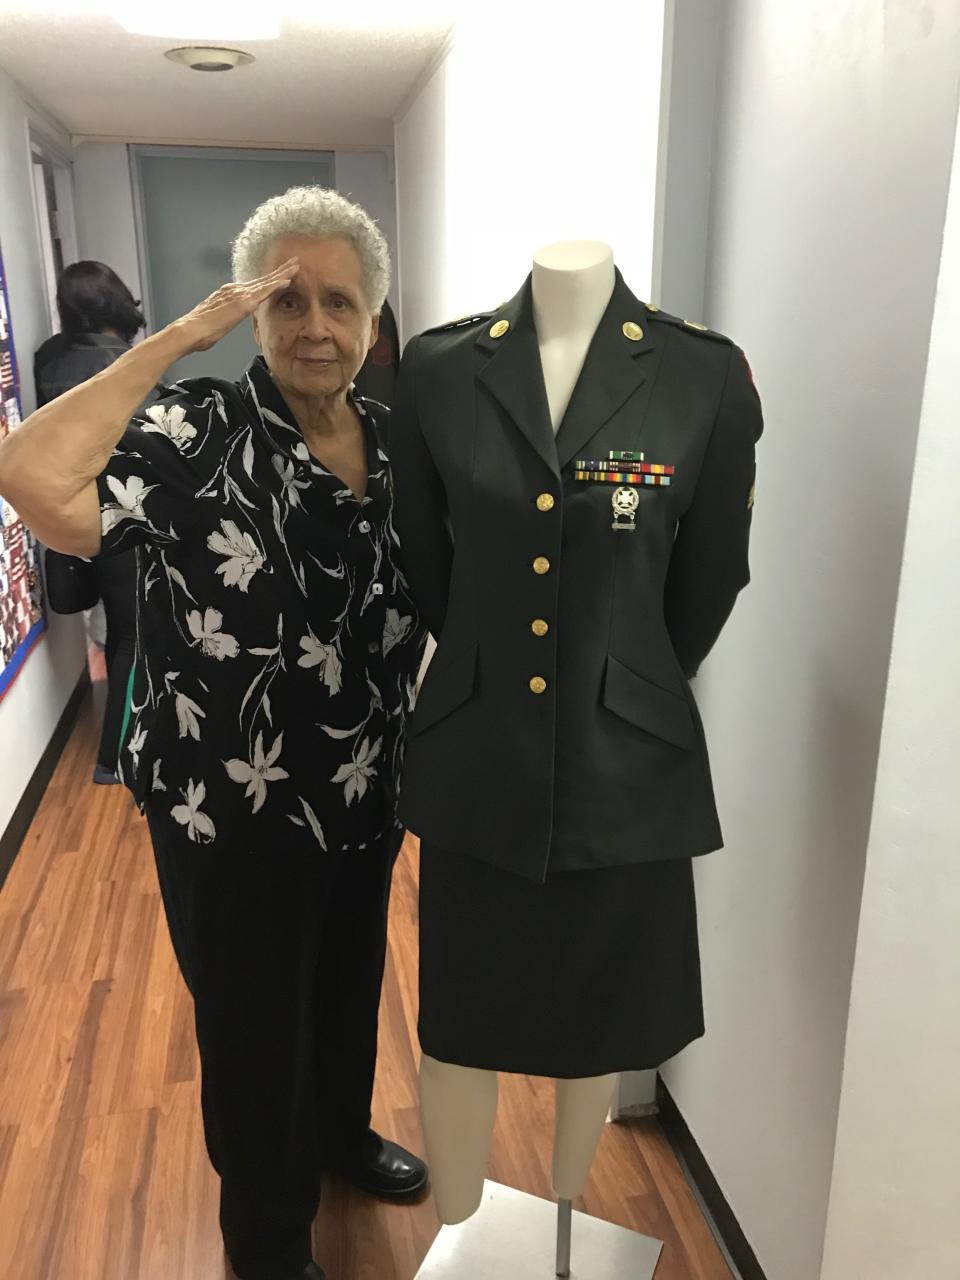 U.S. Army veteran Ruth Young, whose duty included the Vietnam War, salutes next to the uniform she would have worn on display at the Northeast Florida Women Veterans office in Jacksonville. This is one of the uniforms on display at City Hall next week.